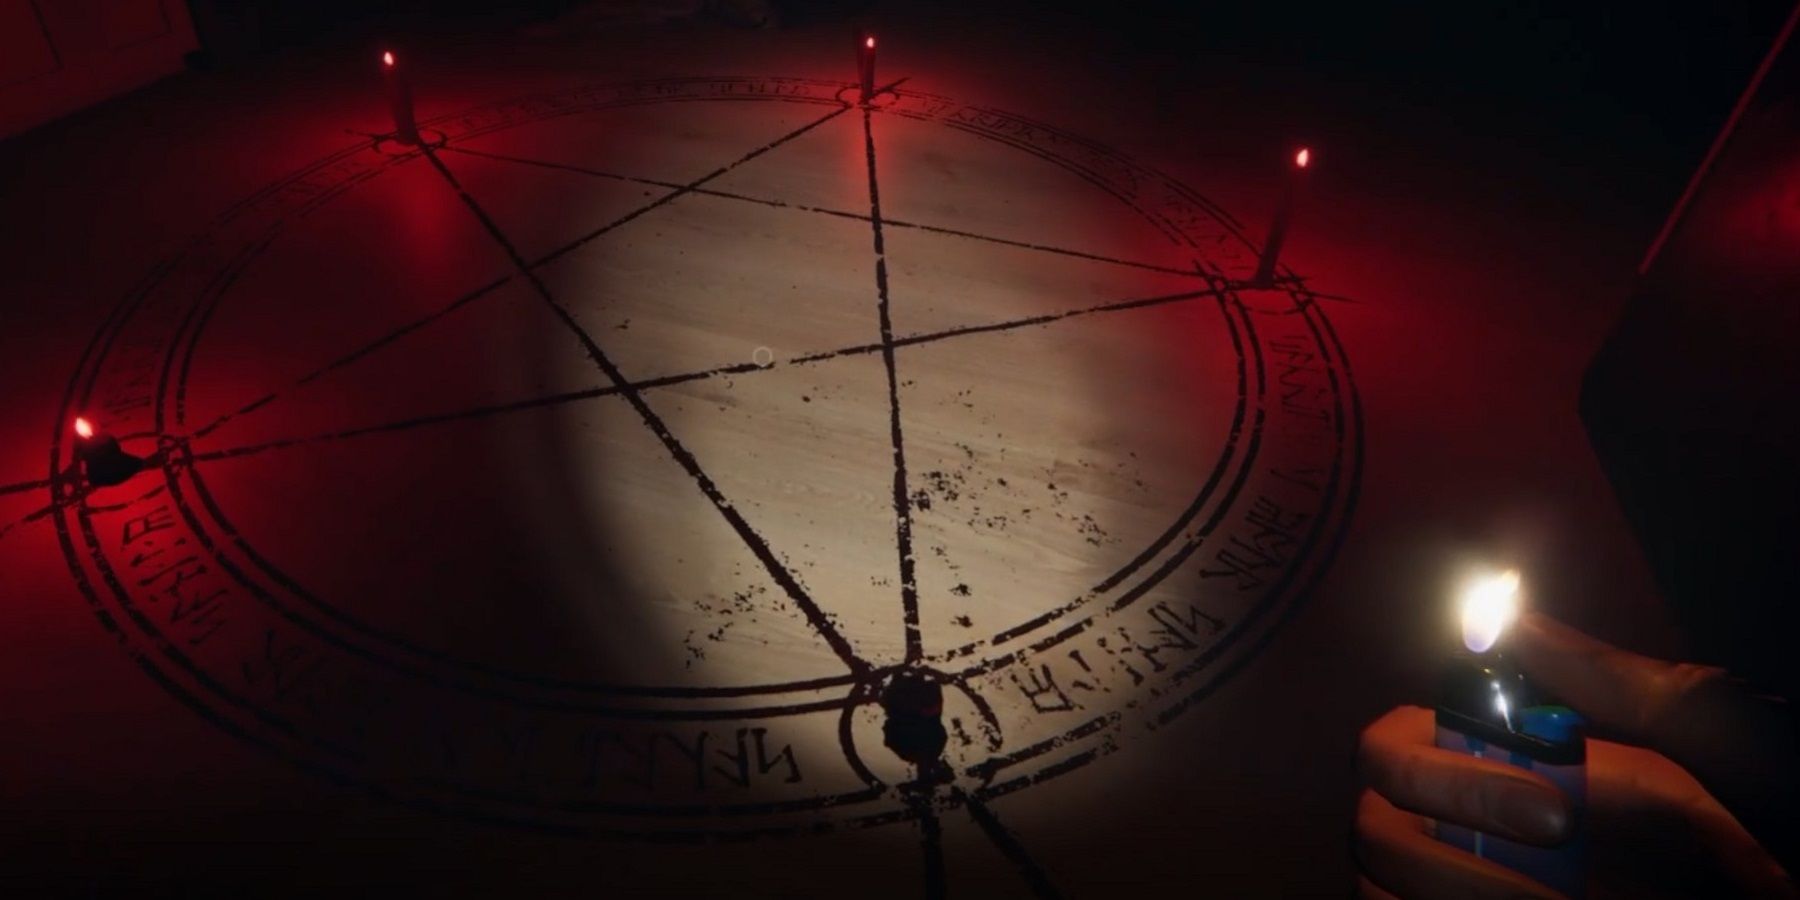 Screenshot from Phasmophobia showing a pentagram on the ground with red candles around it.